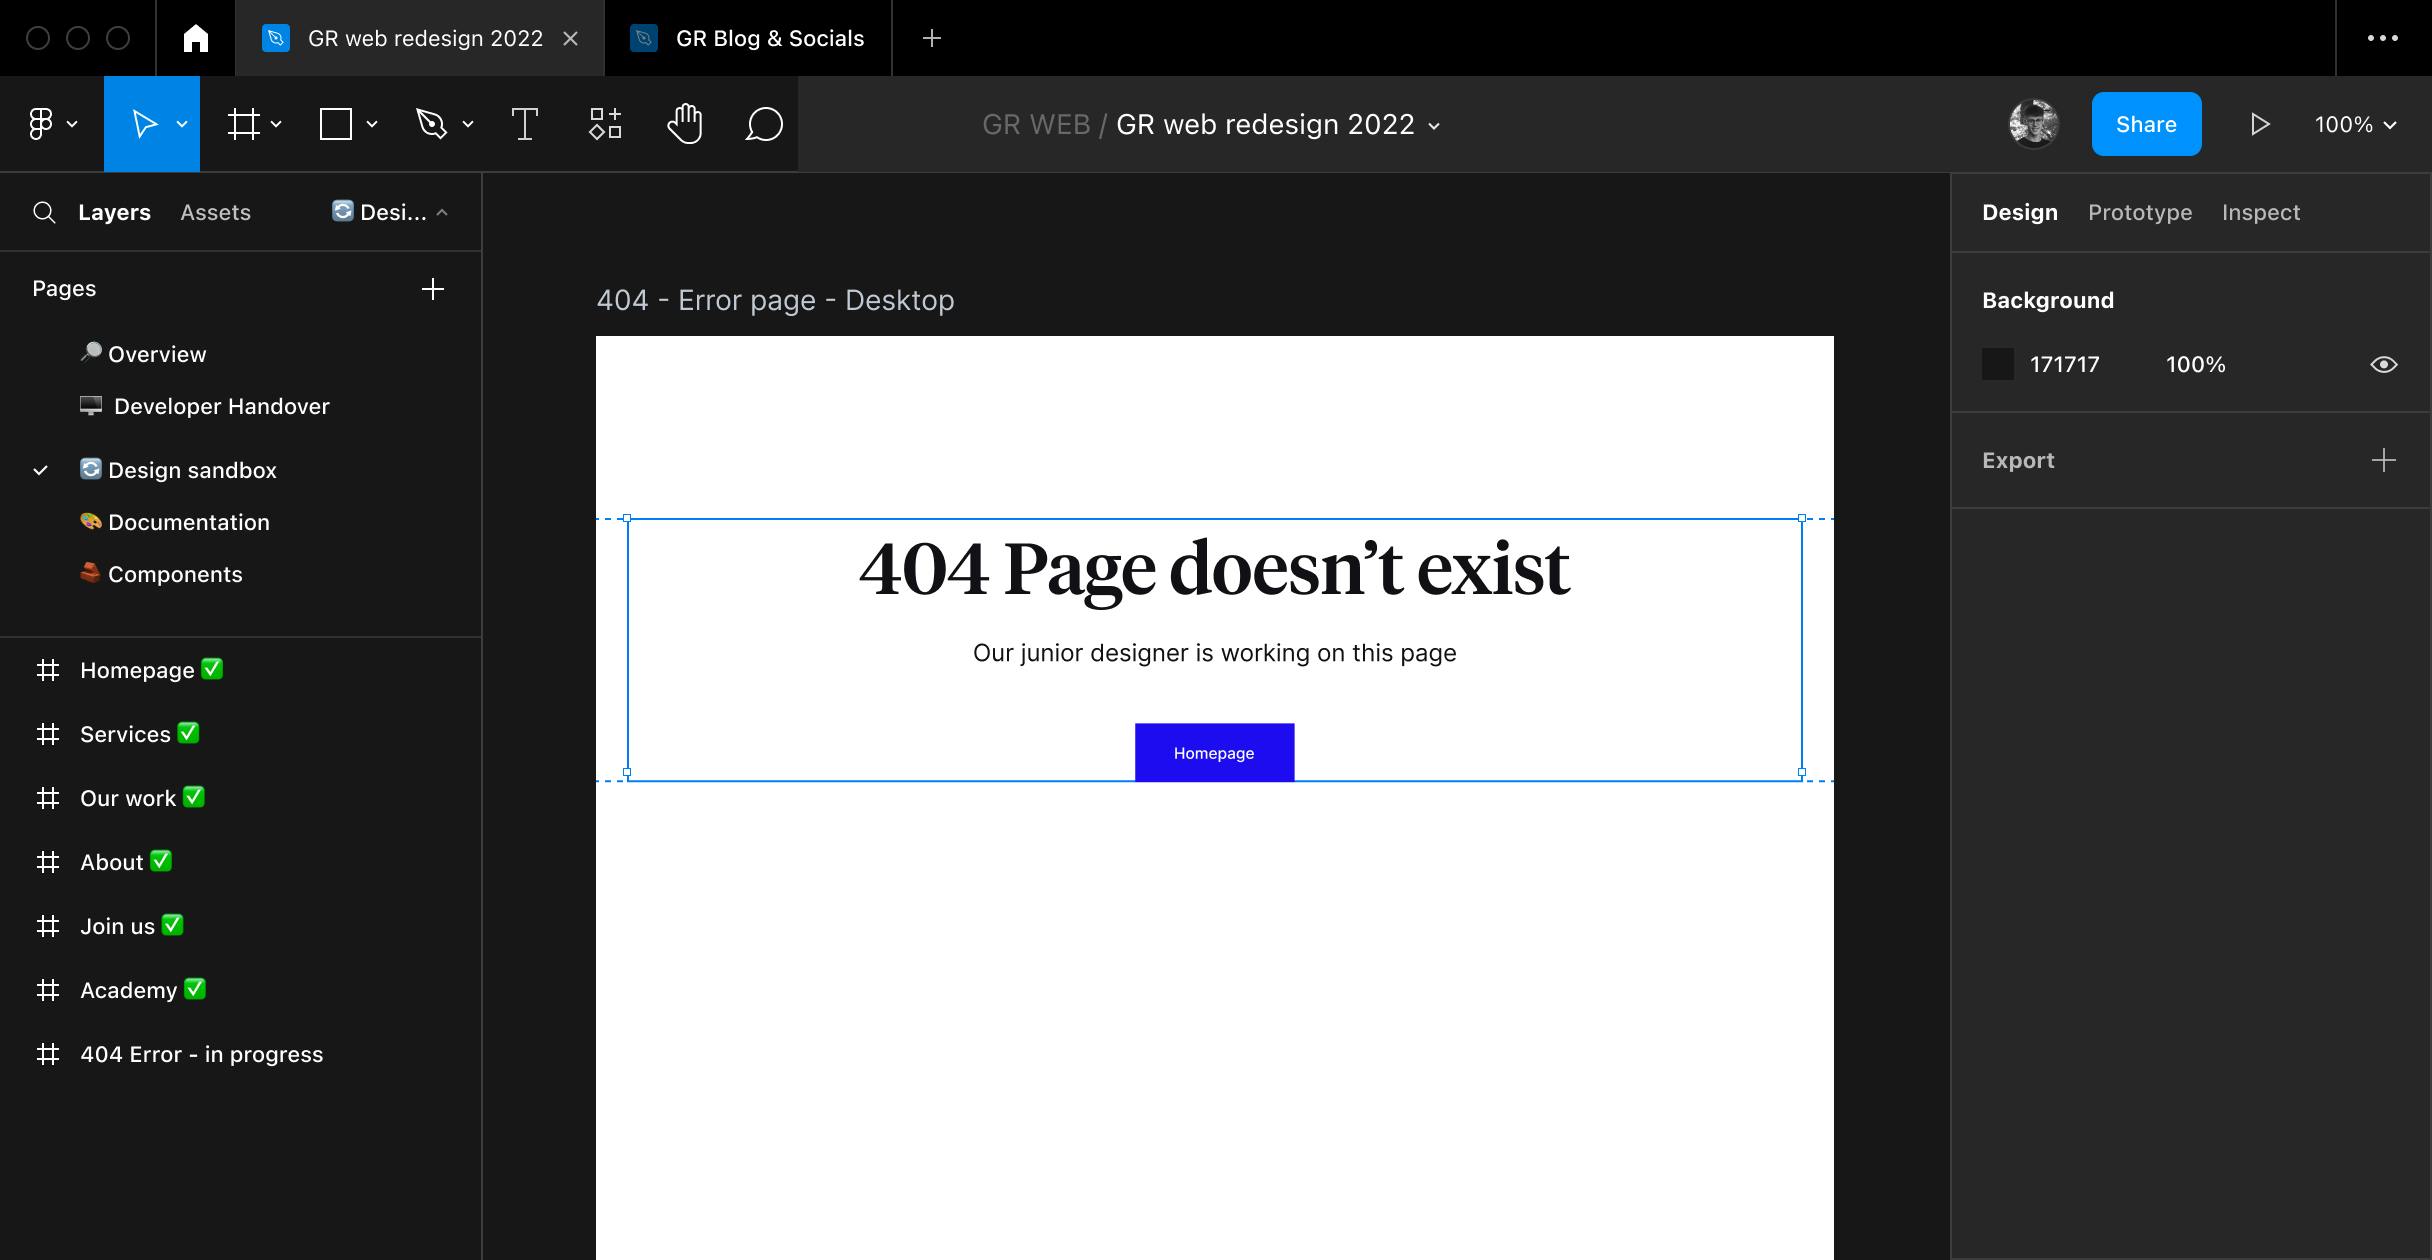 404 Page doesn't exist